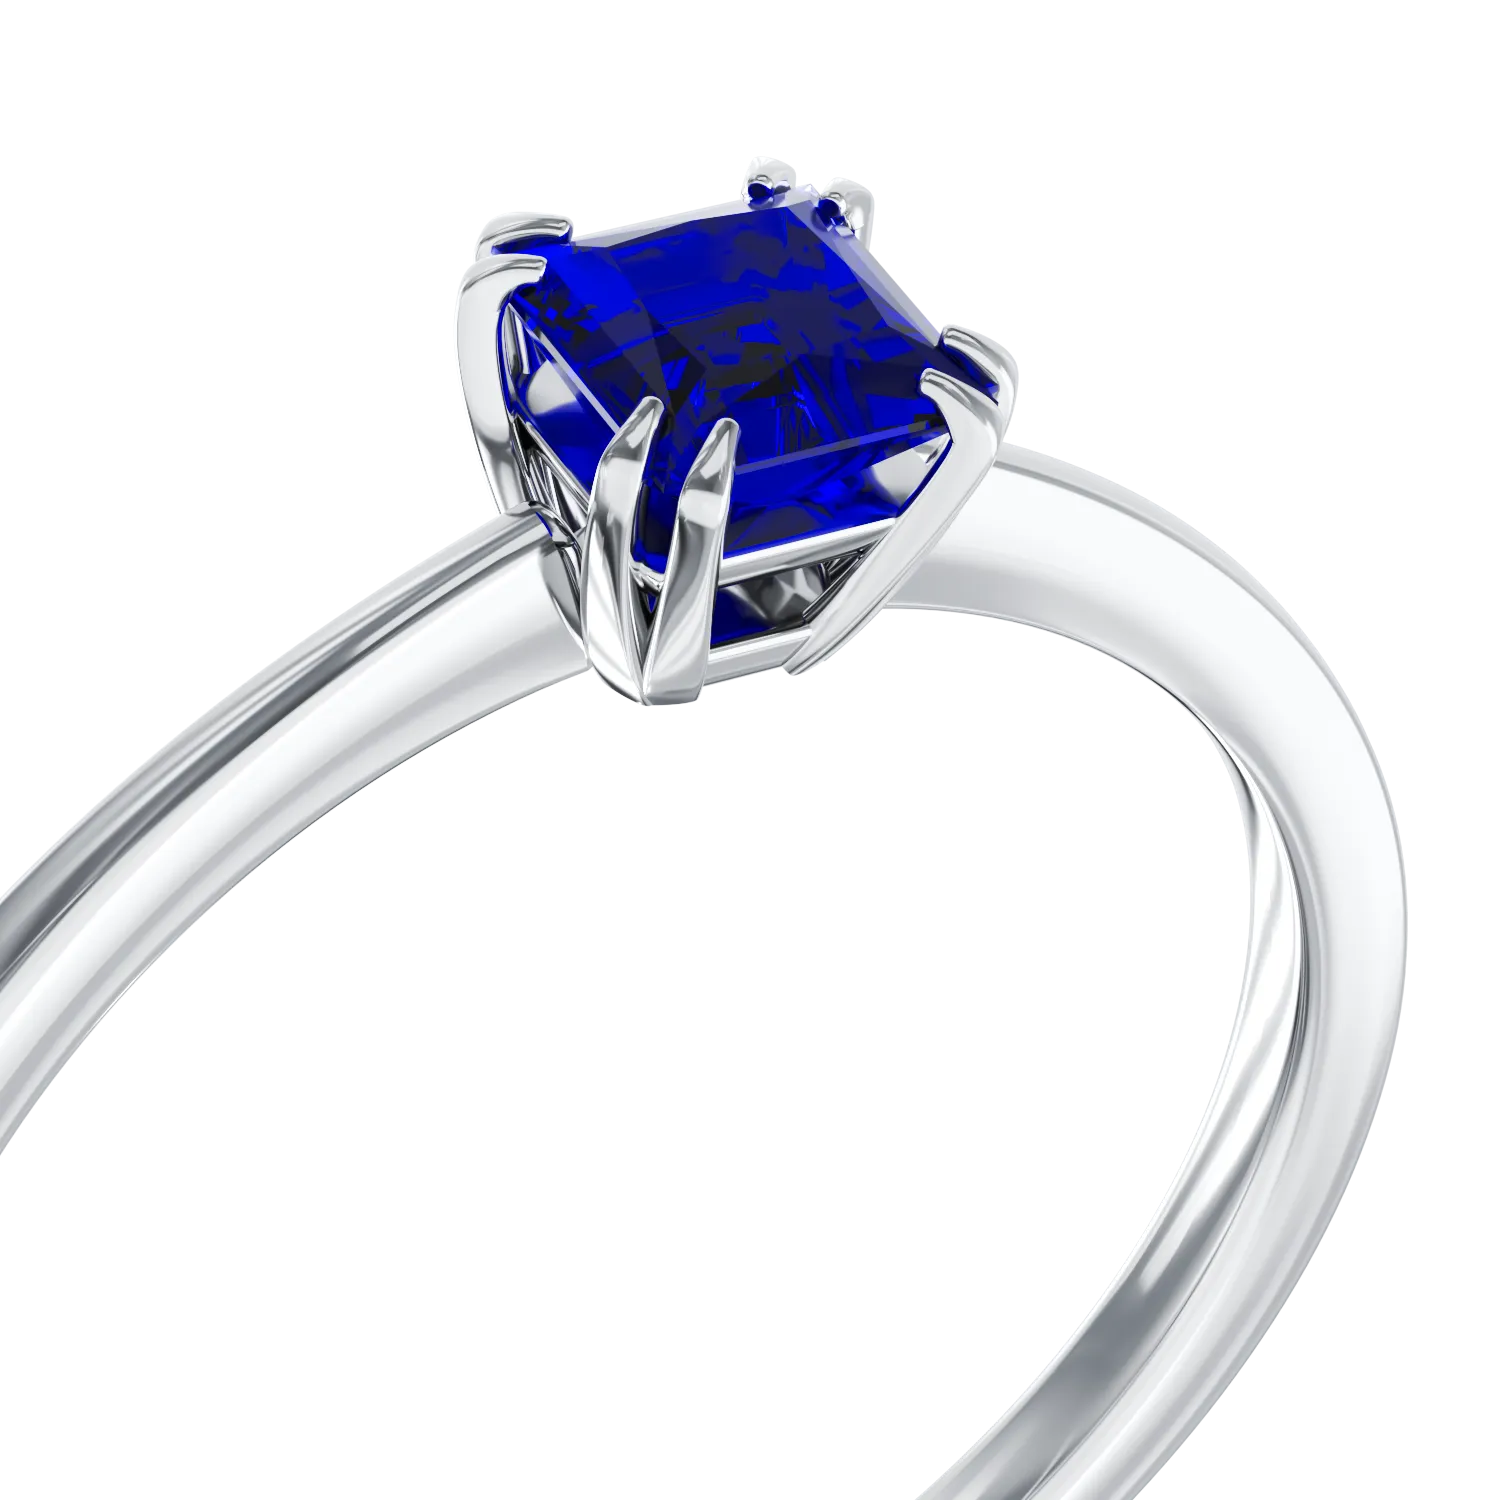 18K white gold engagement ring with sapphire of 0.39ct